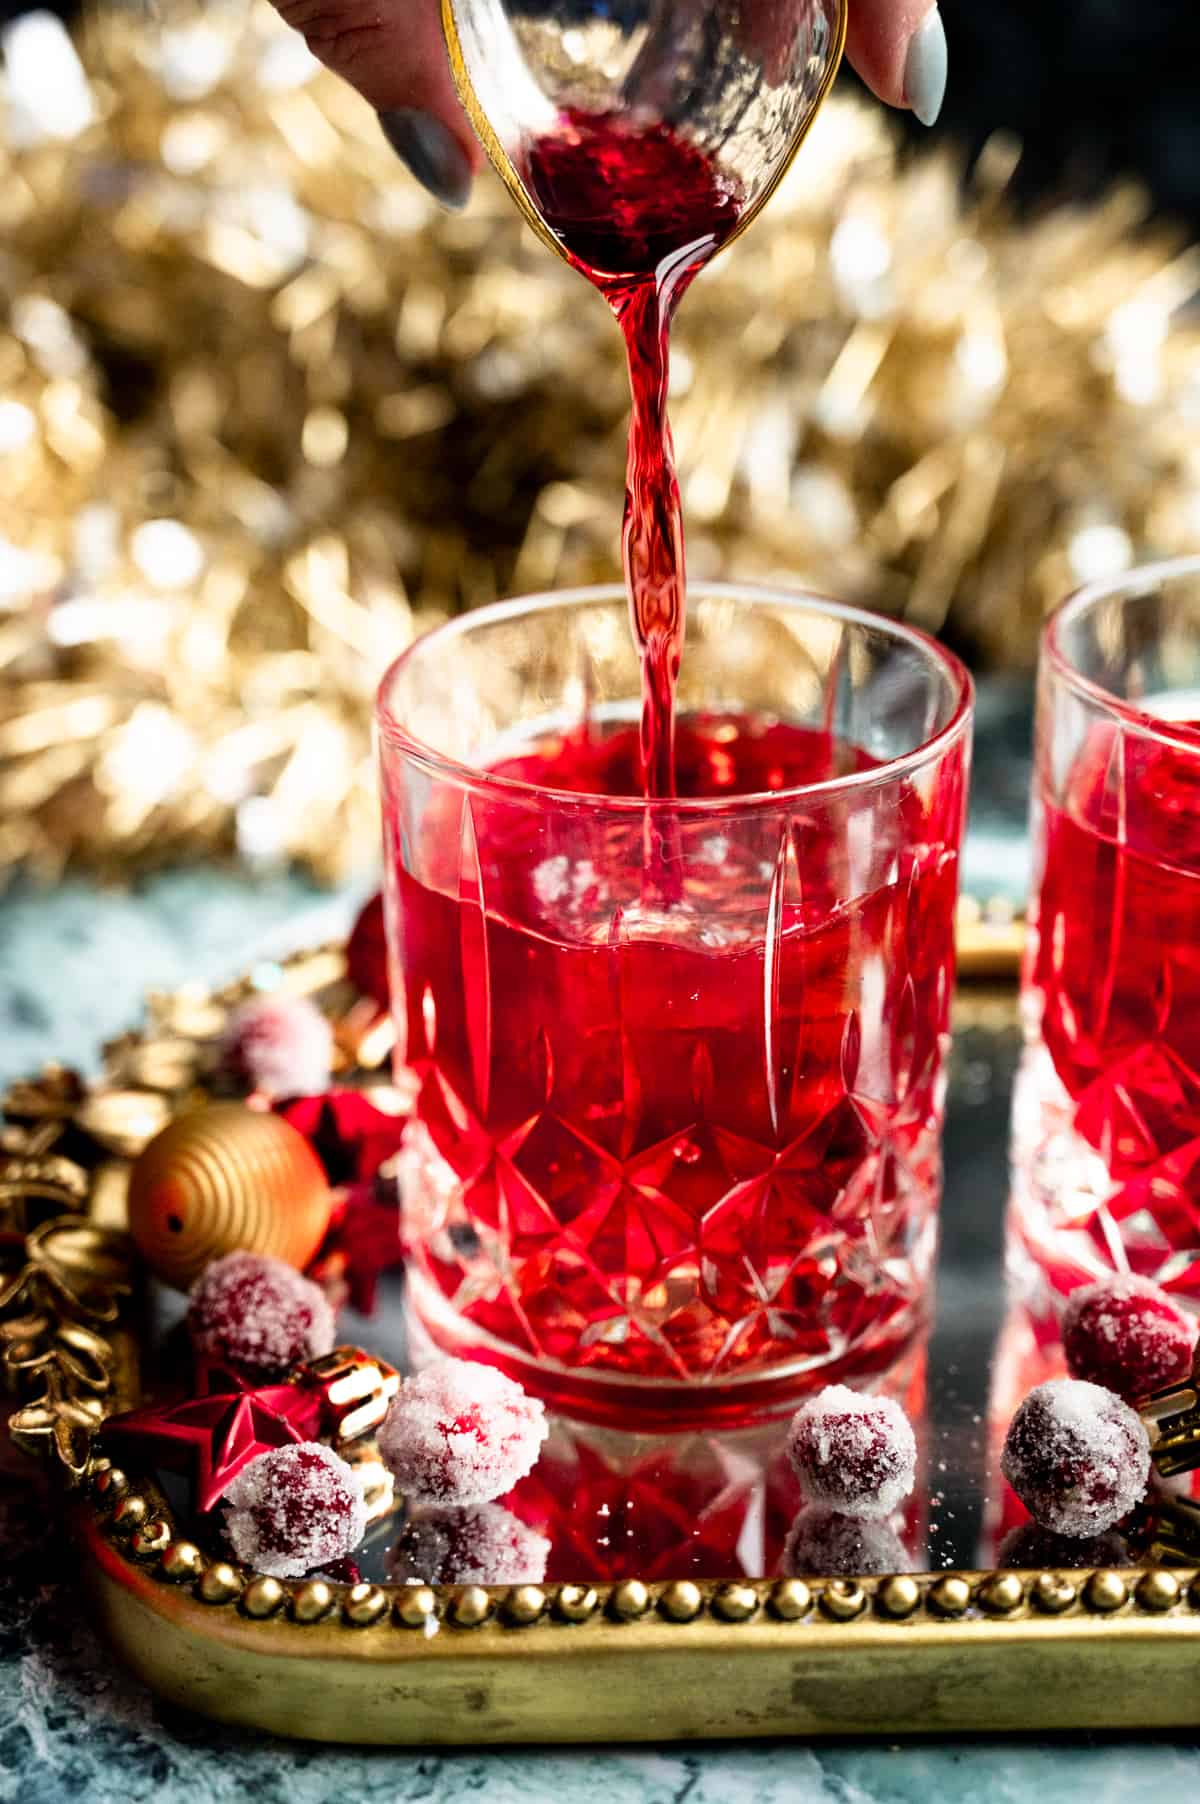 The cranberry juice being poured into the glass.